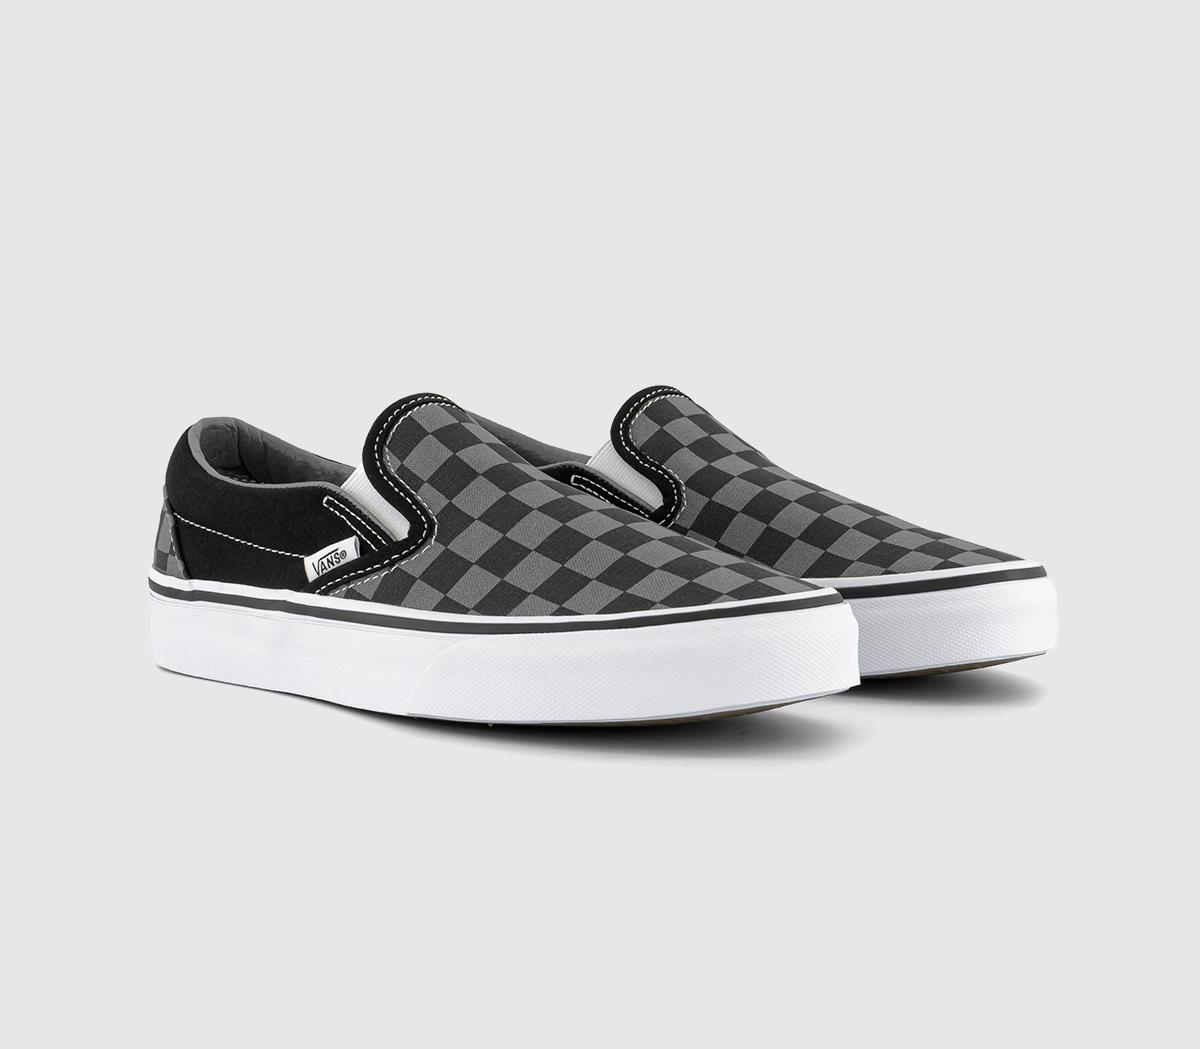 Vans Kids Classic Slip On Trainers In Black And Grey, 5